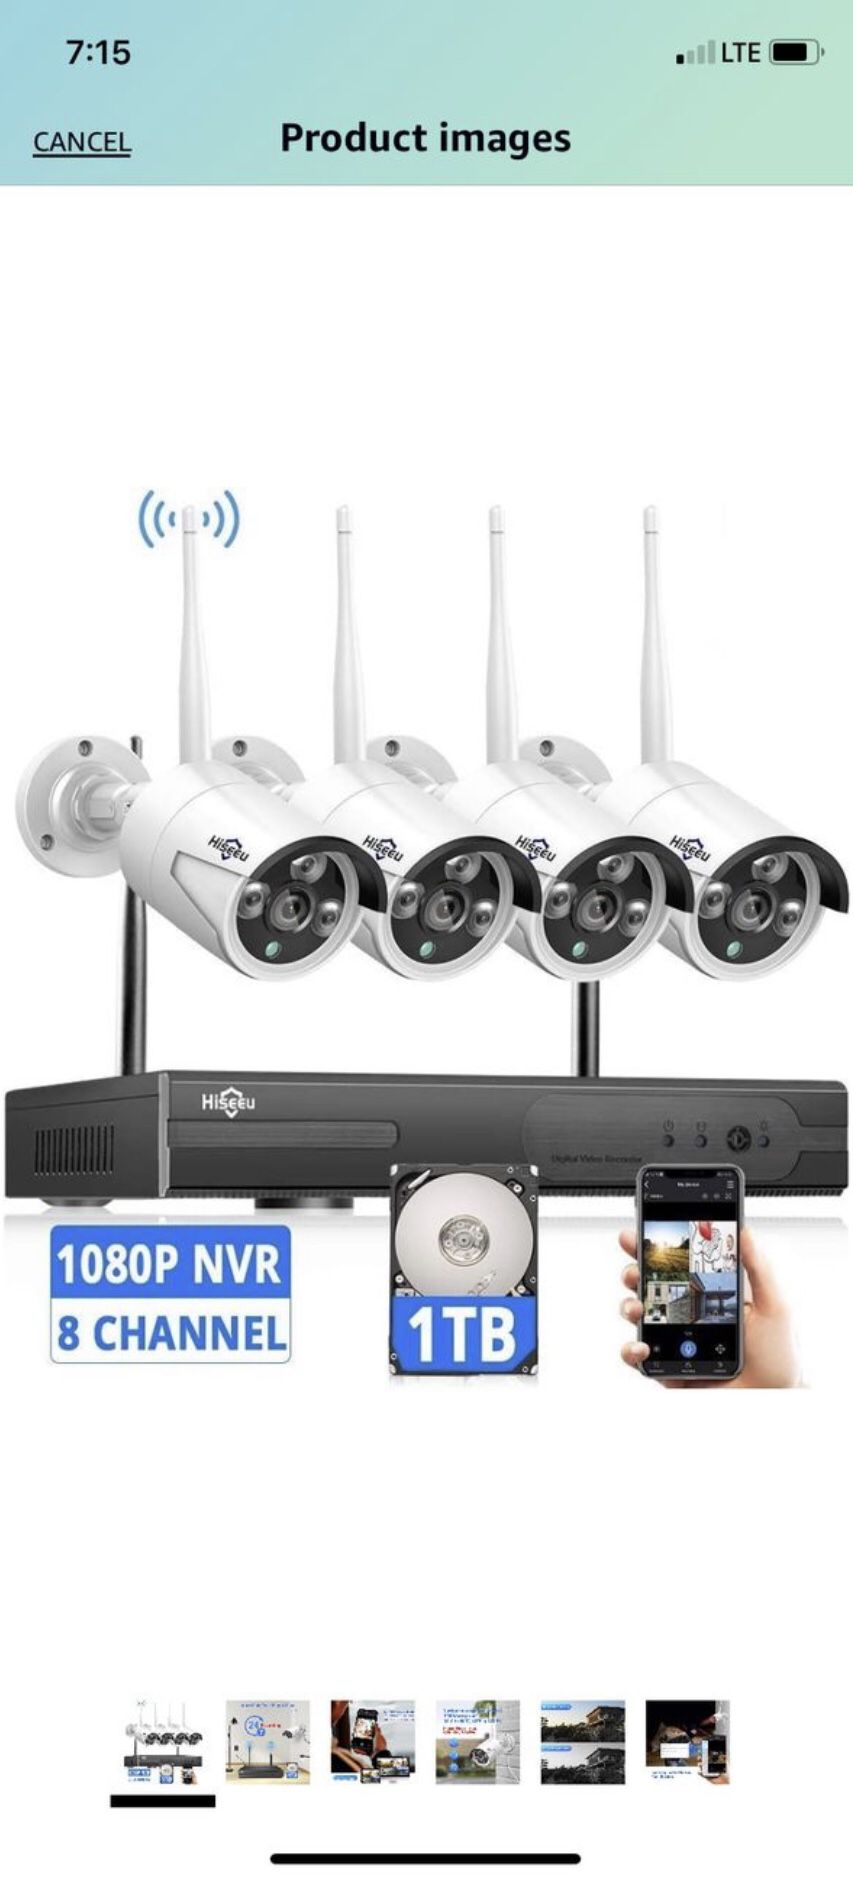 Brand New[Expandable 8CH] Wireless Security Camera System with 1TB Hard Drive with One-Way Audio, 8 Channel NVR 4Pcs 1080P 2.0MP Night Vision WiFi IP